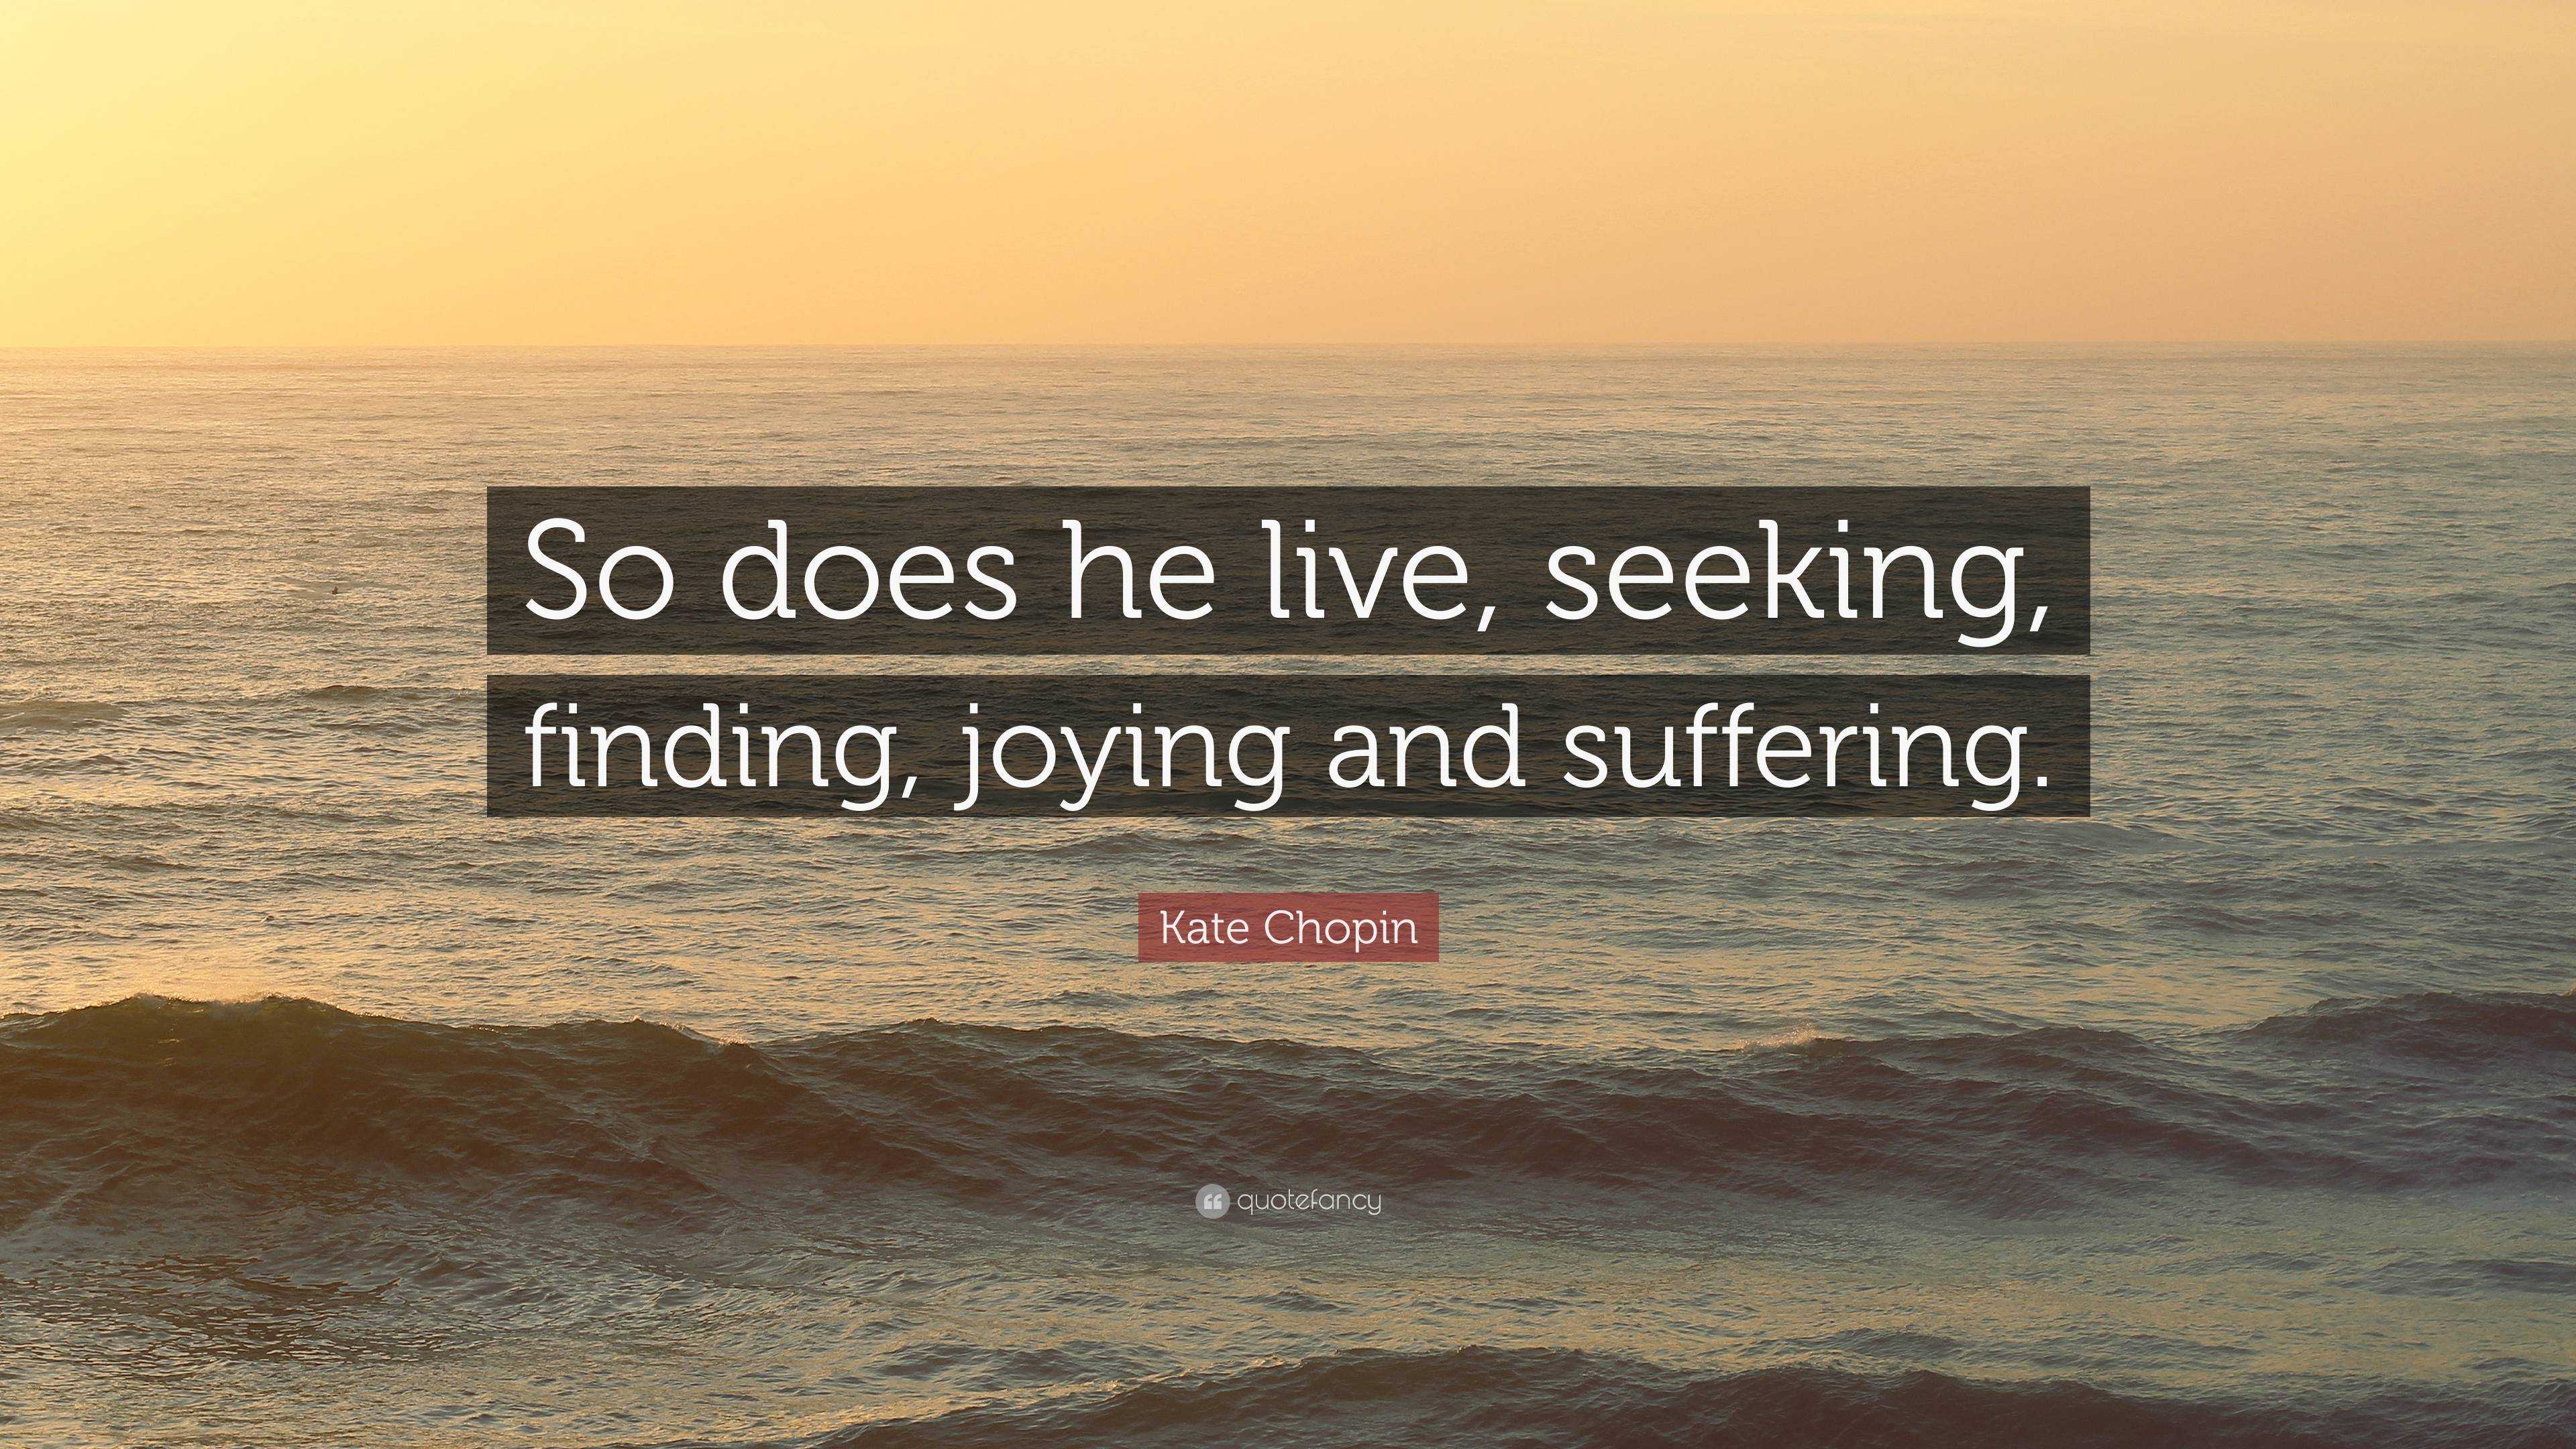 Kate Chopin Quote “So does he live, seeking, finding, joying and